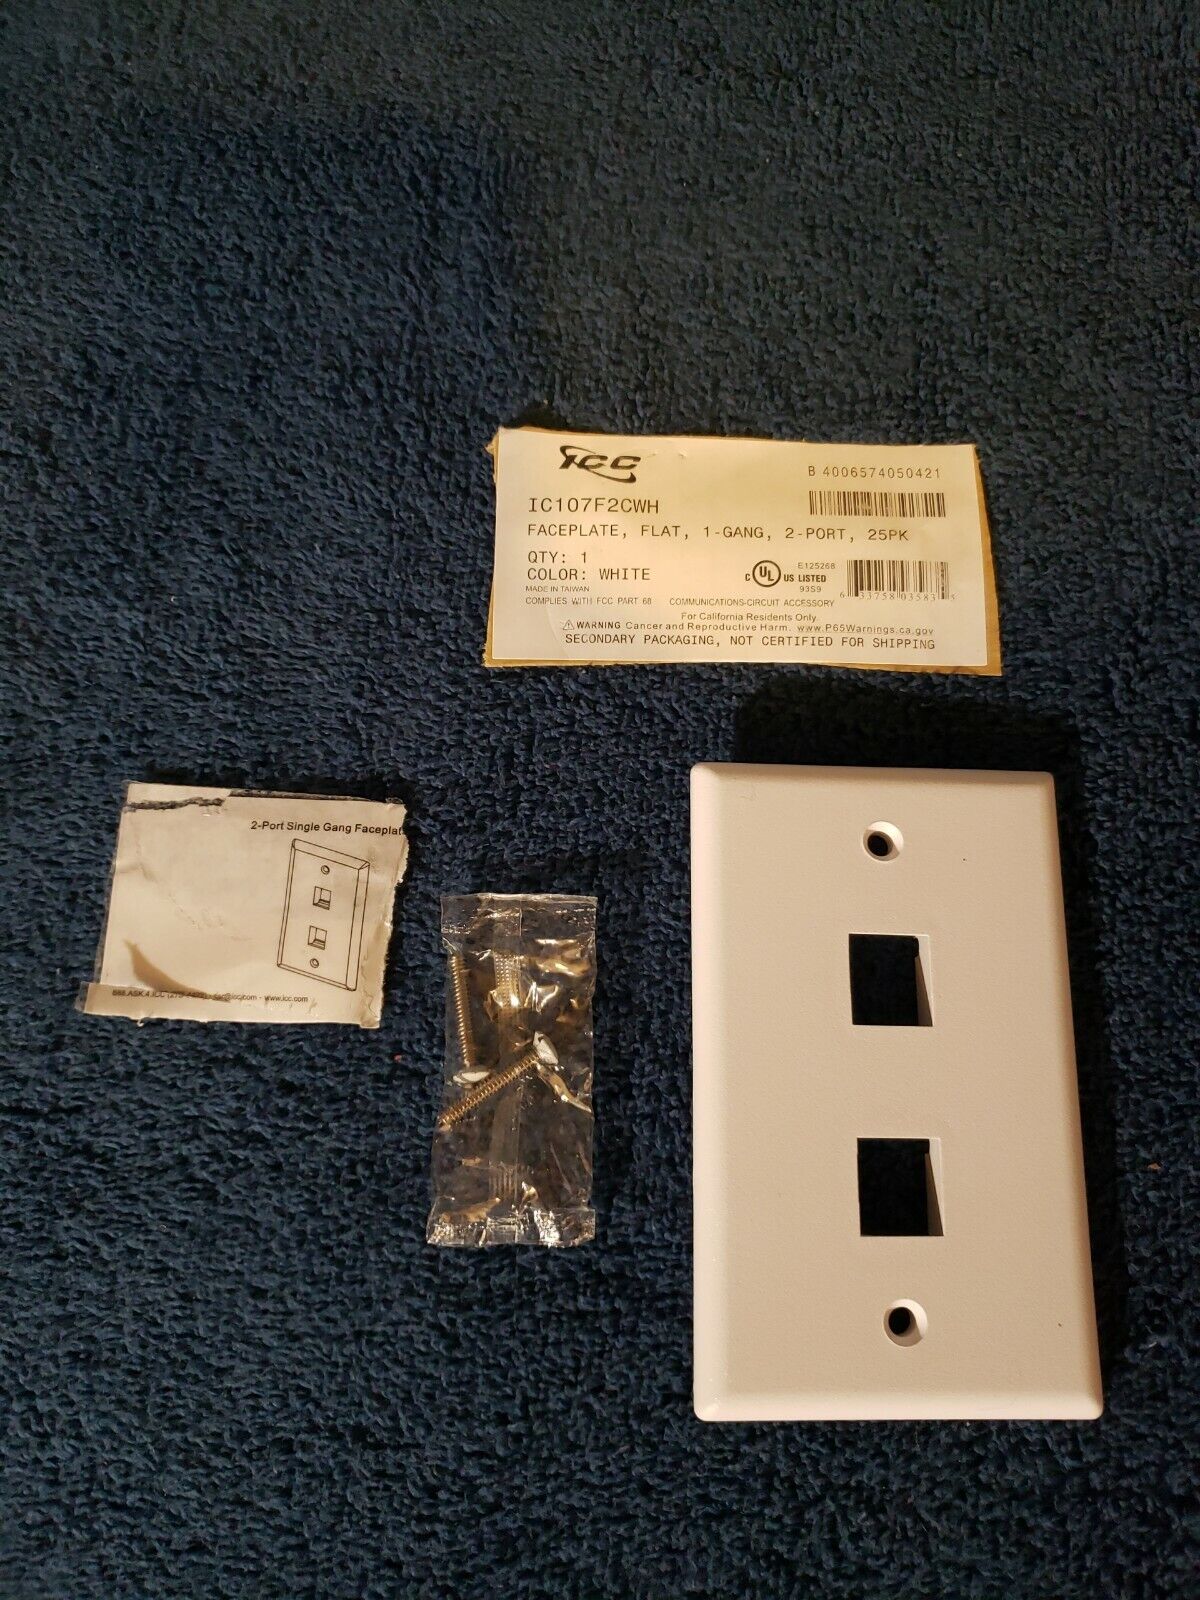 5 pack of Icc Ic107F2Cwh Faceplate- Flat-1-Gang-2-Port